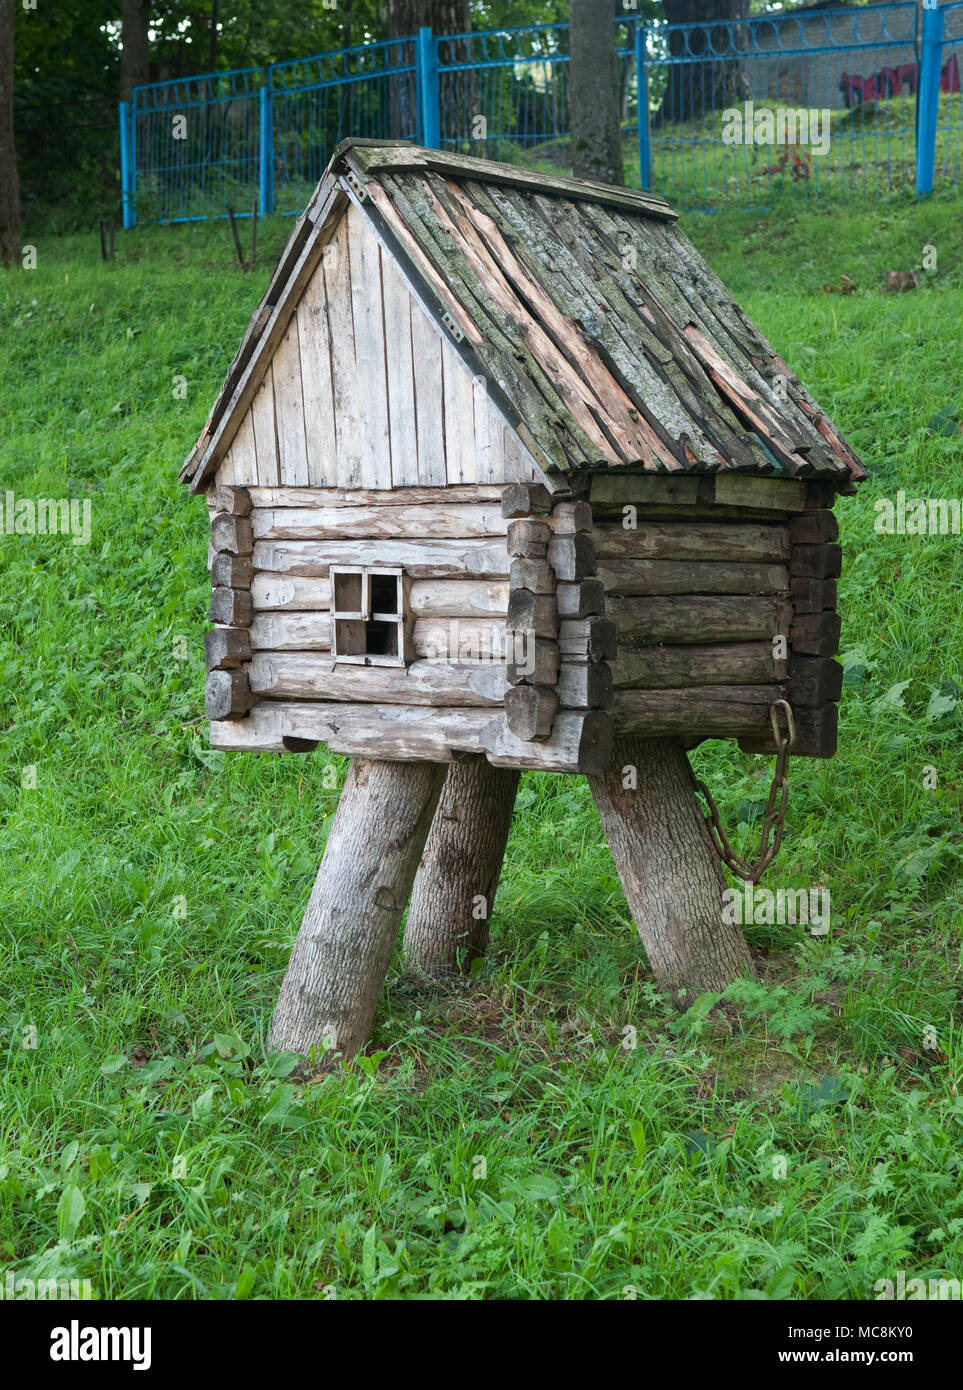 Decorative small wooden hut for garden decoration Stock Photo